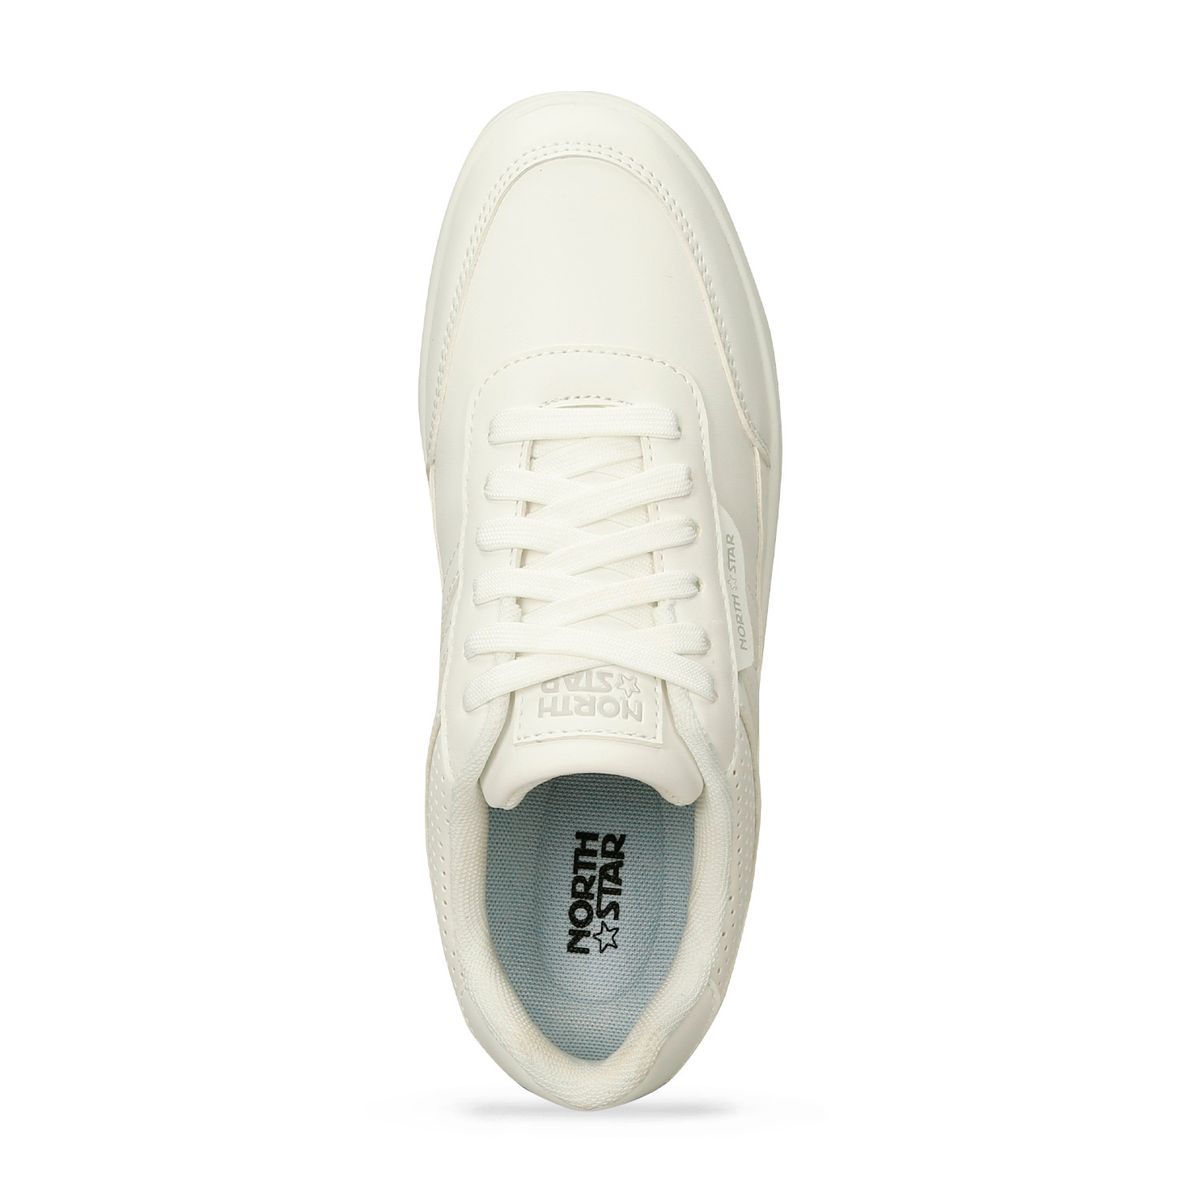 Tenis Casuales Blanco North Star Ines Maisy Mujer